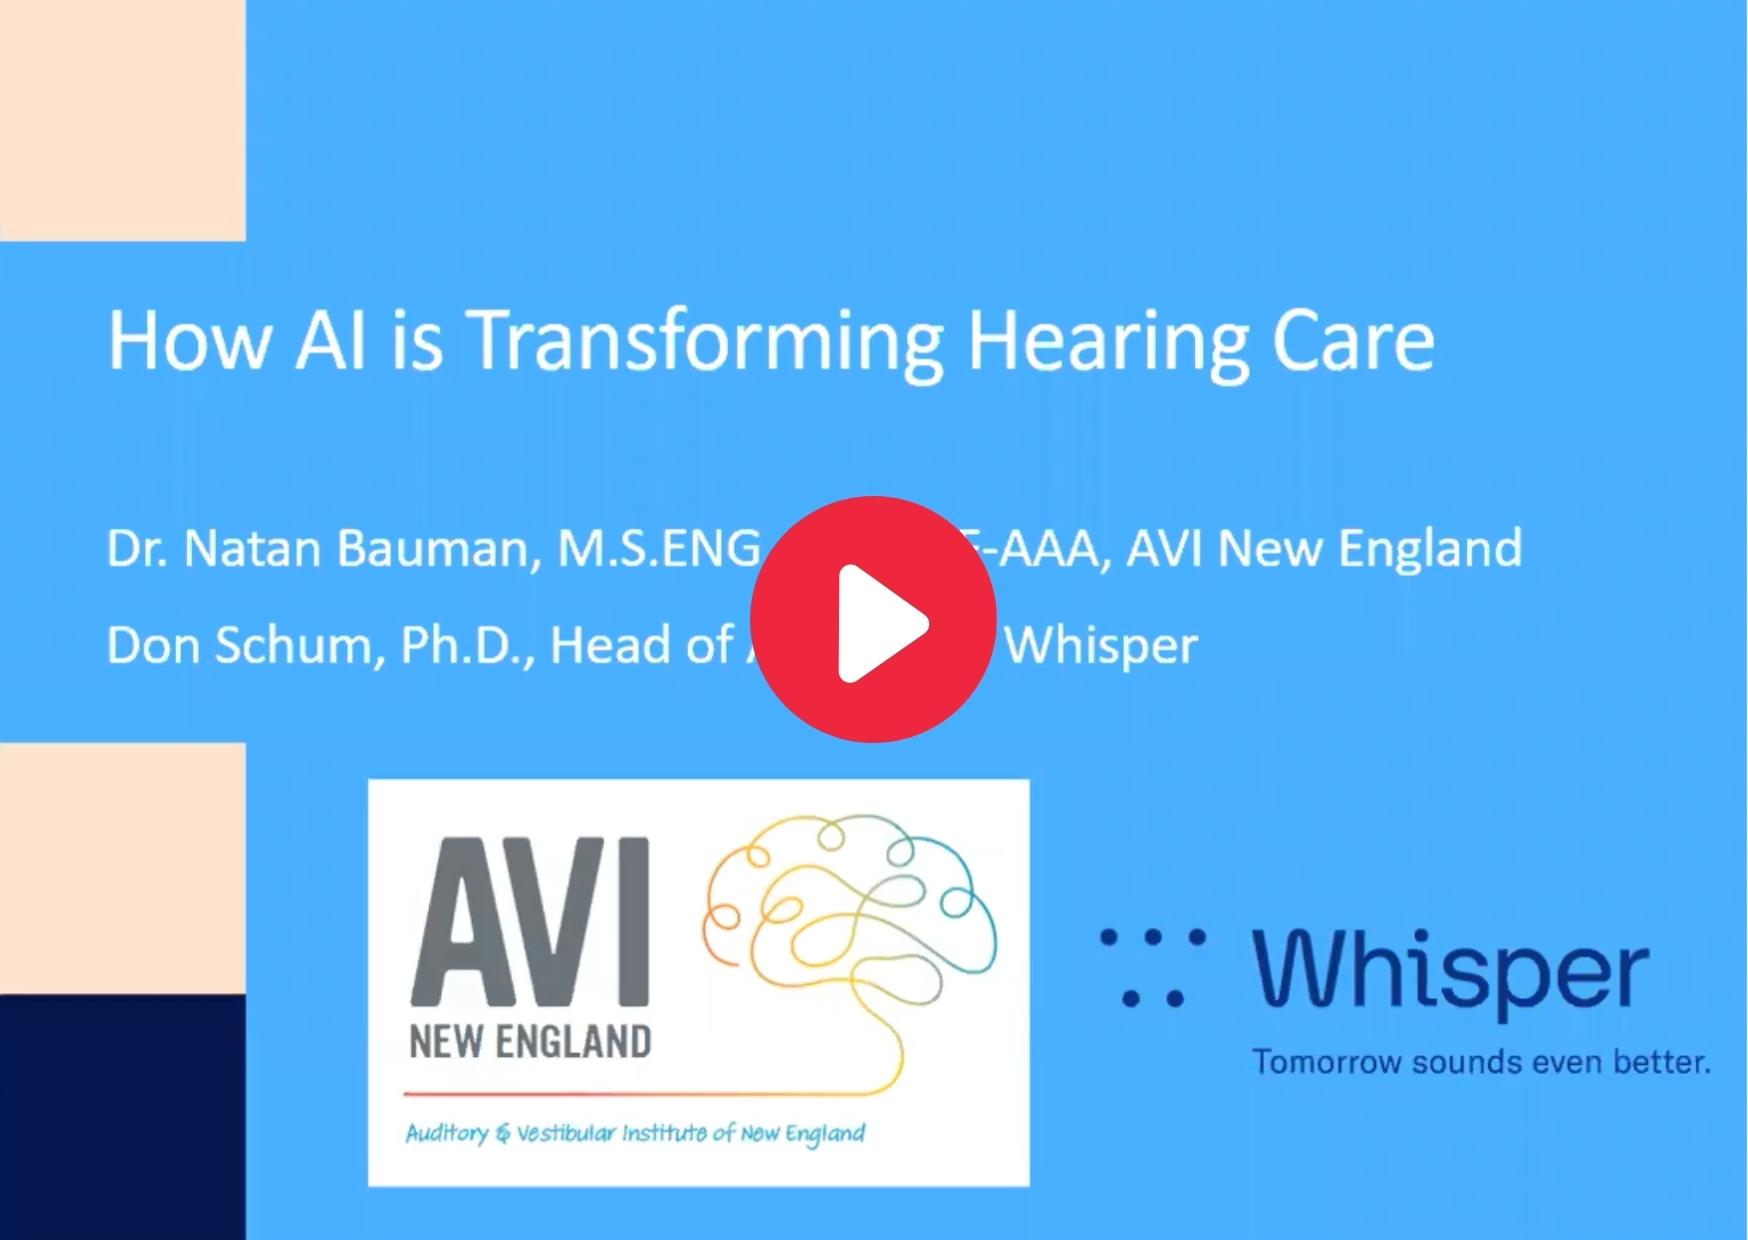 How AI is transforming hearing care